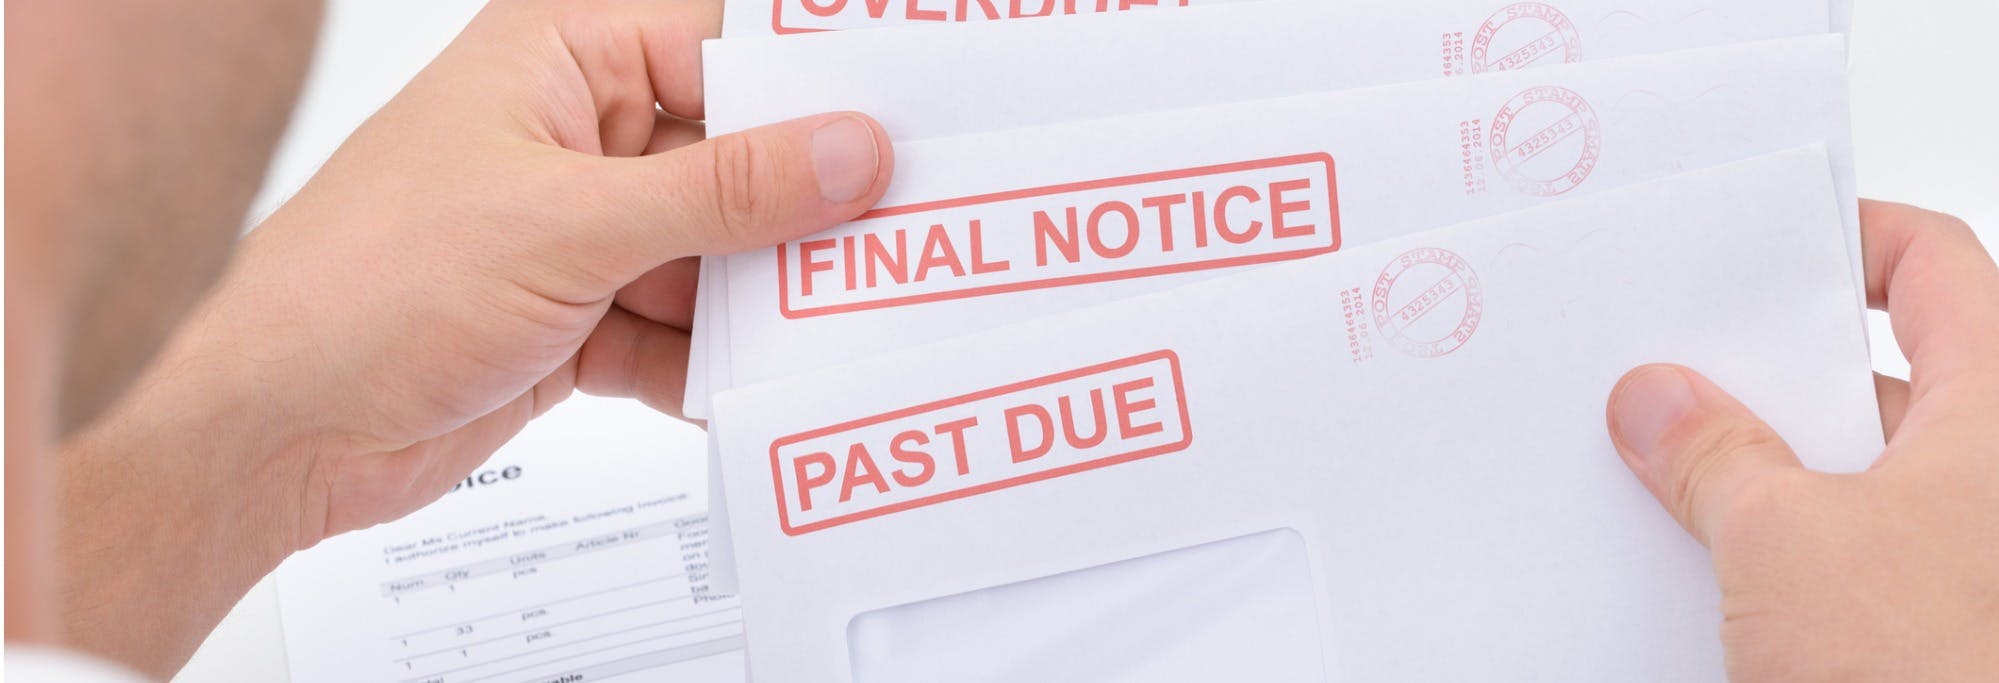 Person holding a stack of envelopes marked "final notice" and "past due", overdue in rental payments